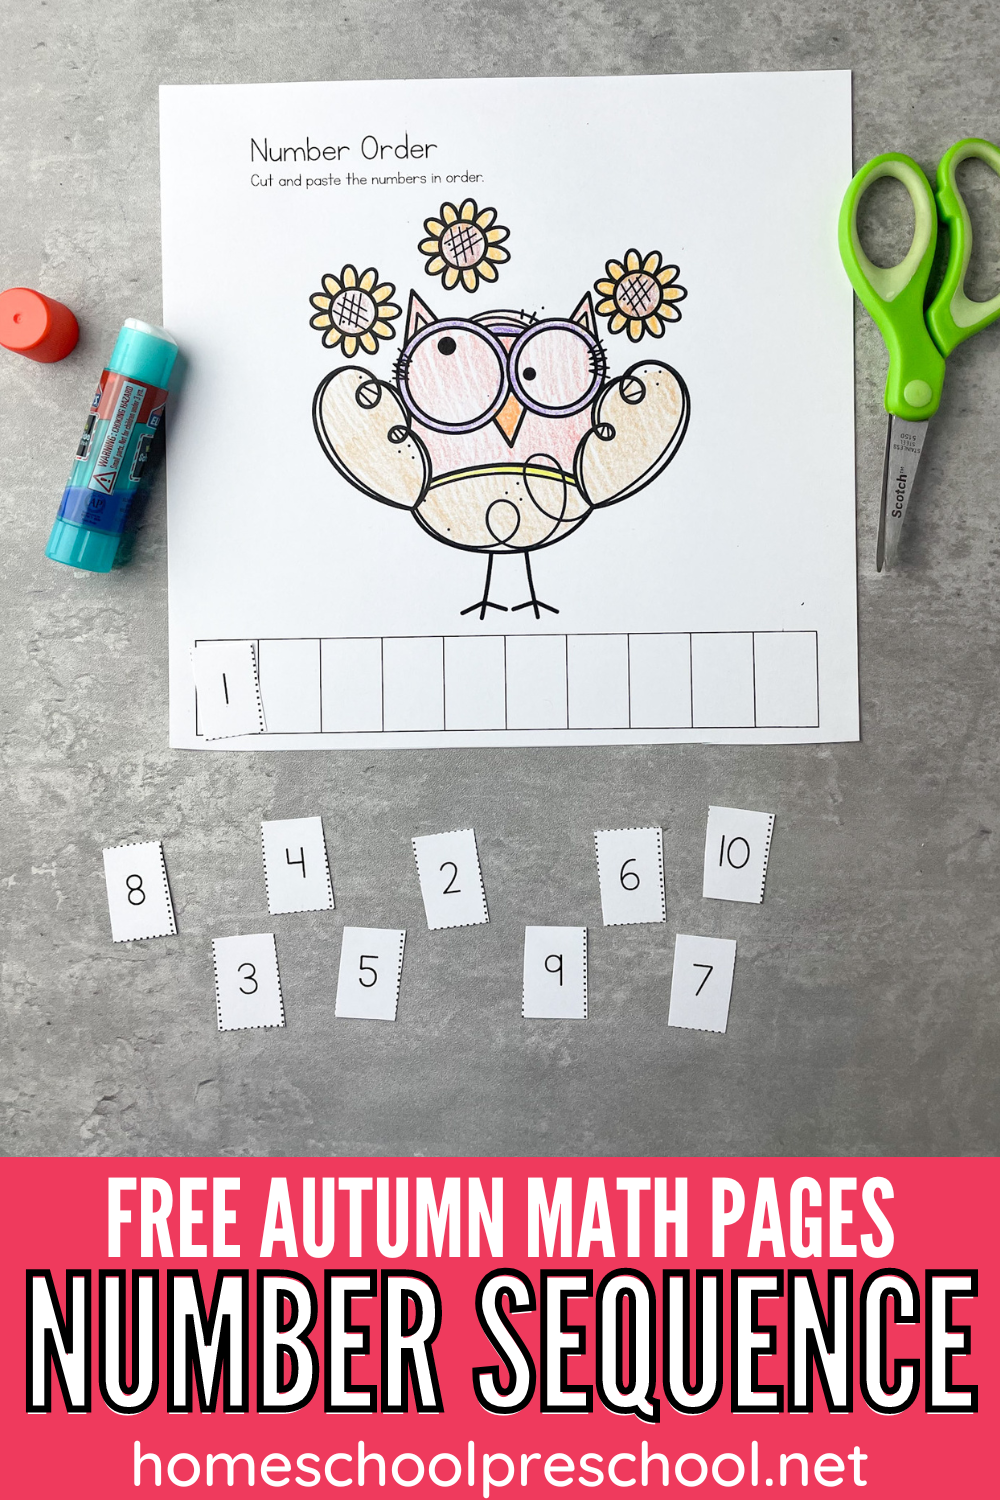 number-sequencing-worksheets Autumn Number Sequence Worksheets